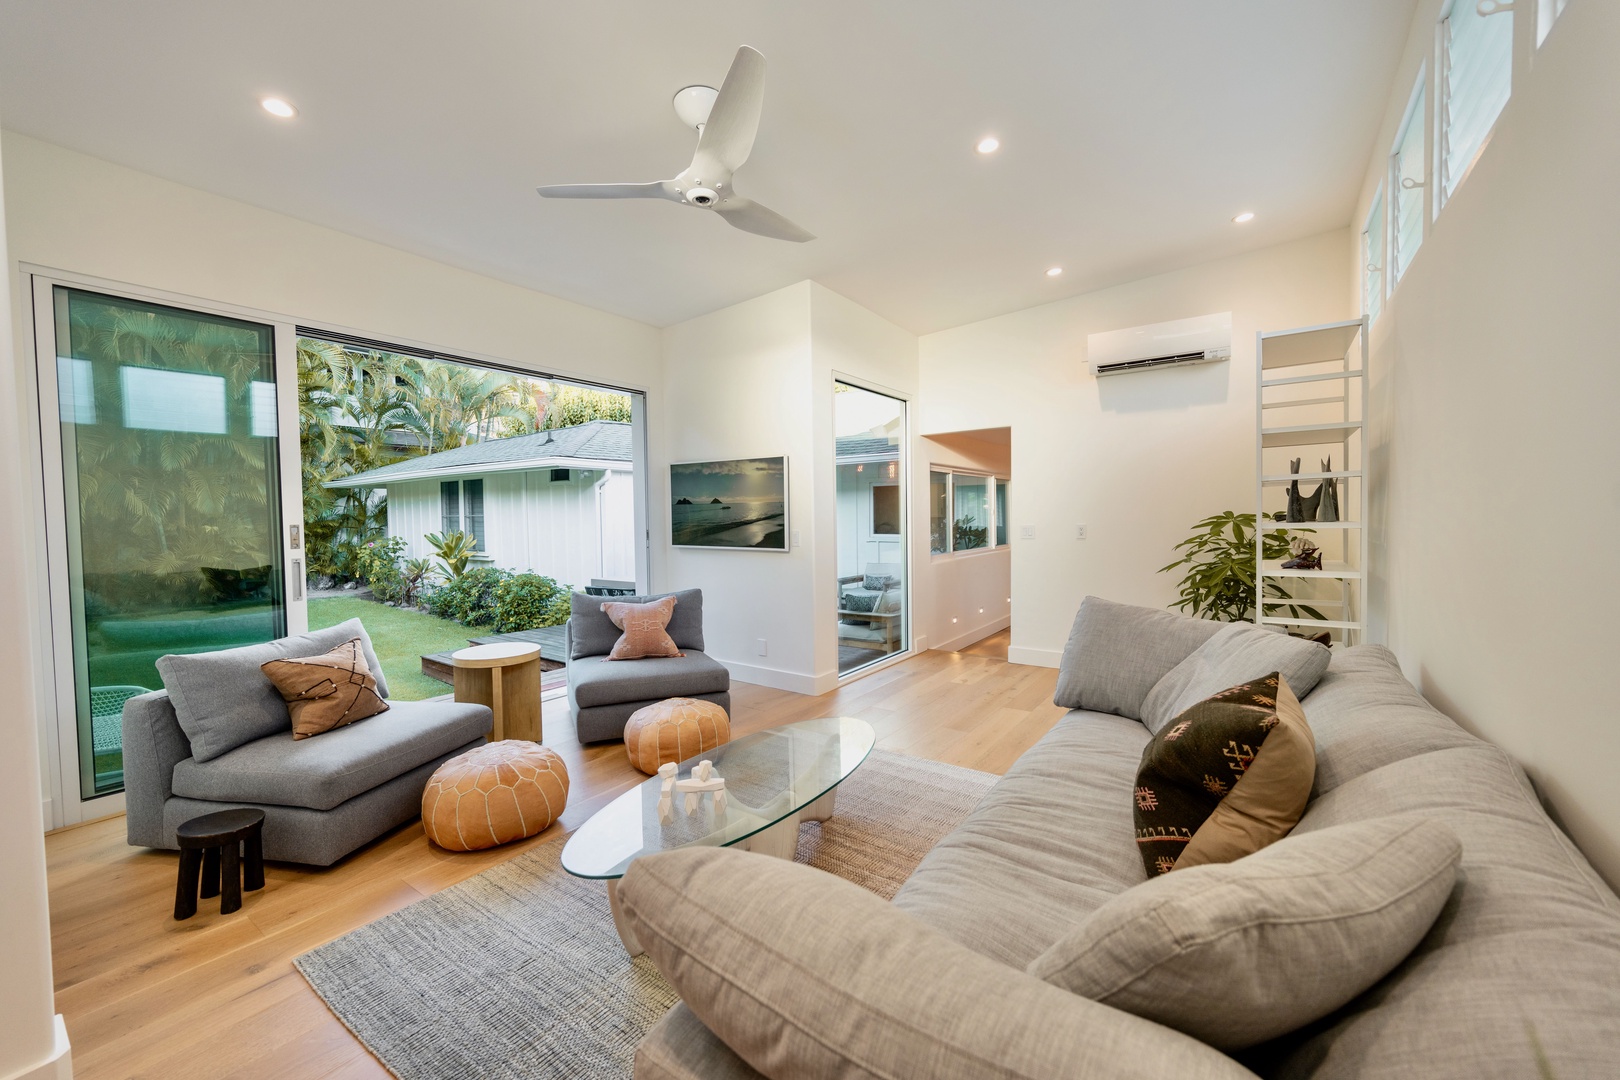 Kailua Vacation Rentals, Lanikai Ola Nani - Experience the luxury of space in our open living area.